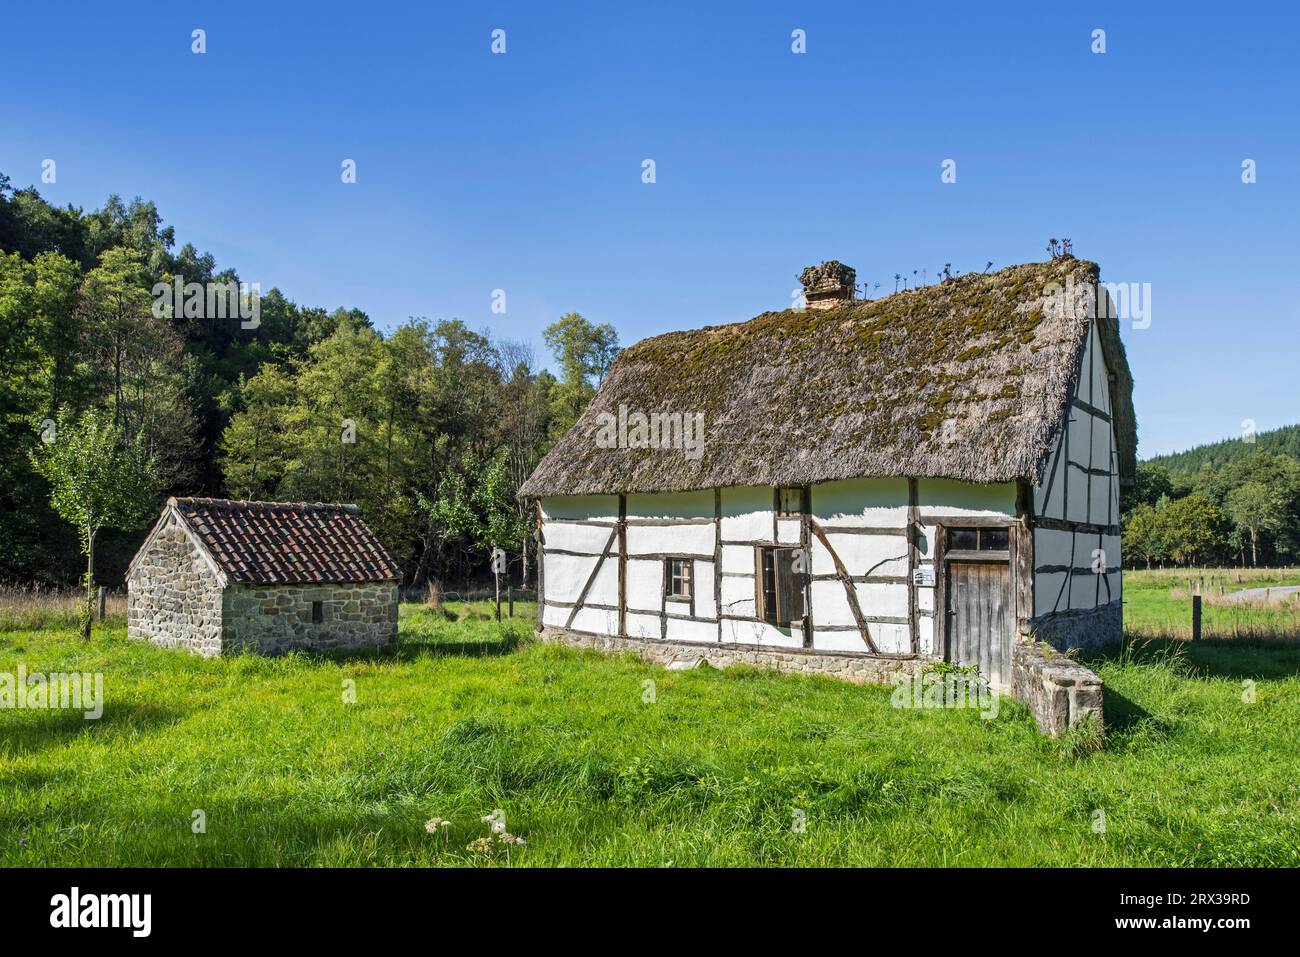 19th century cottage at Domaine du Fourneau Saint-Michel, open-air museum of Walloon rural life at Saint-Hubert, Luxembourg, Belgian Ardennes, Belgium Stock Photo